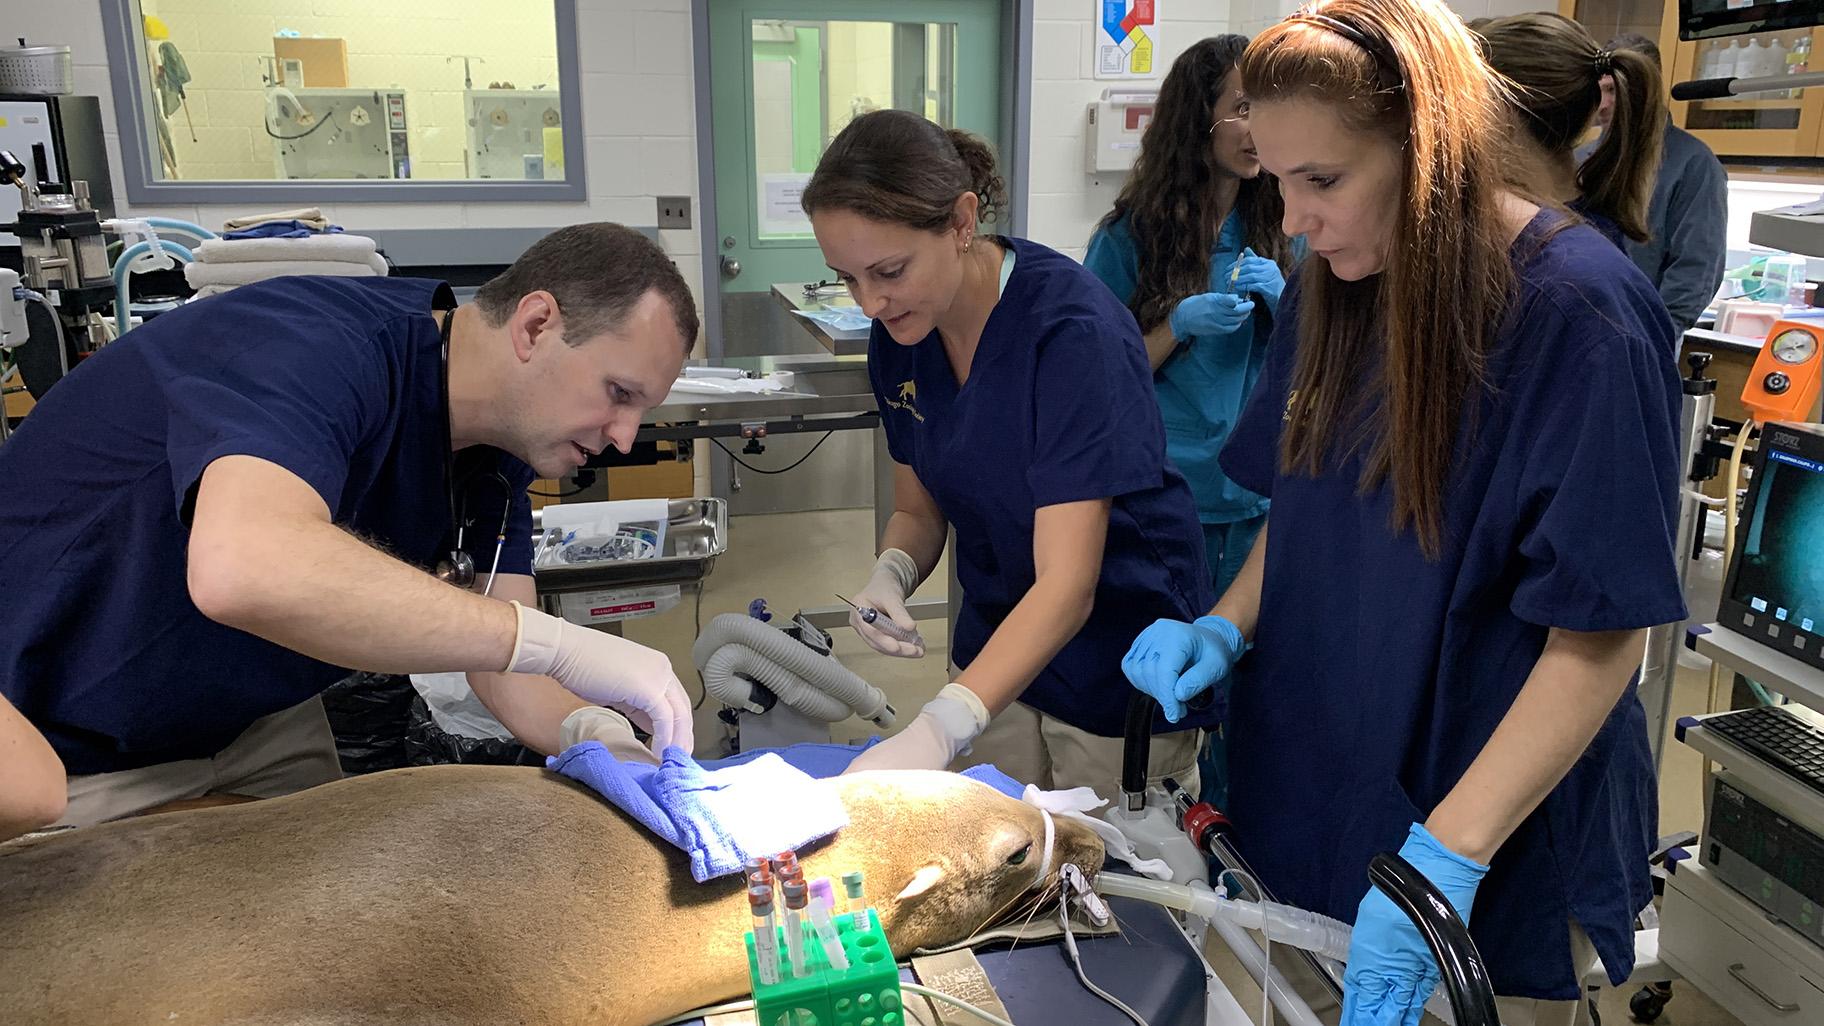 Sabiena, one of Brookfield Zoo’s two newly adopted California Sea Lions, is examined by members of the zoo’s medical team on Tuesday, Sept. 24, 2019. (Jay Shefsky / WTTW News)